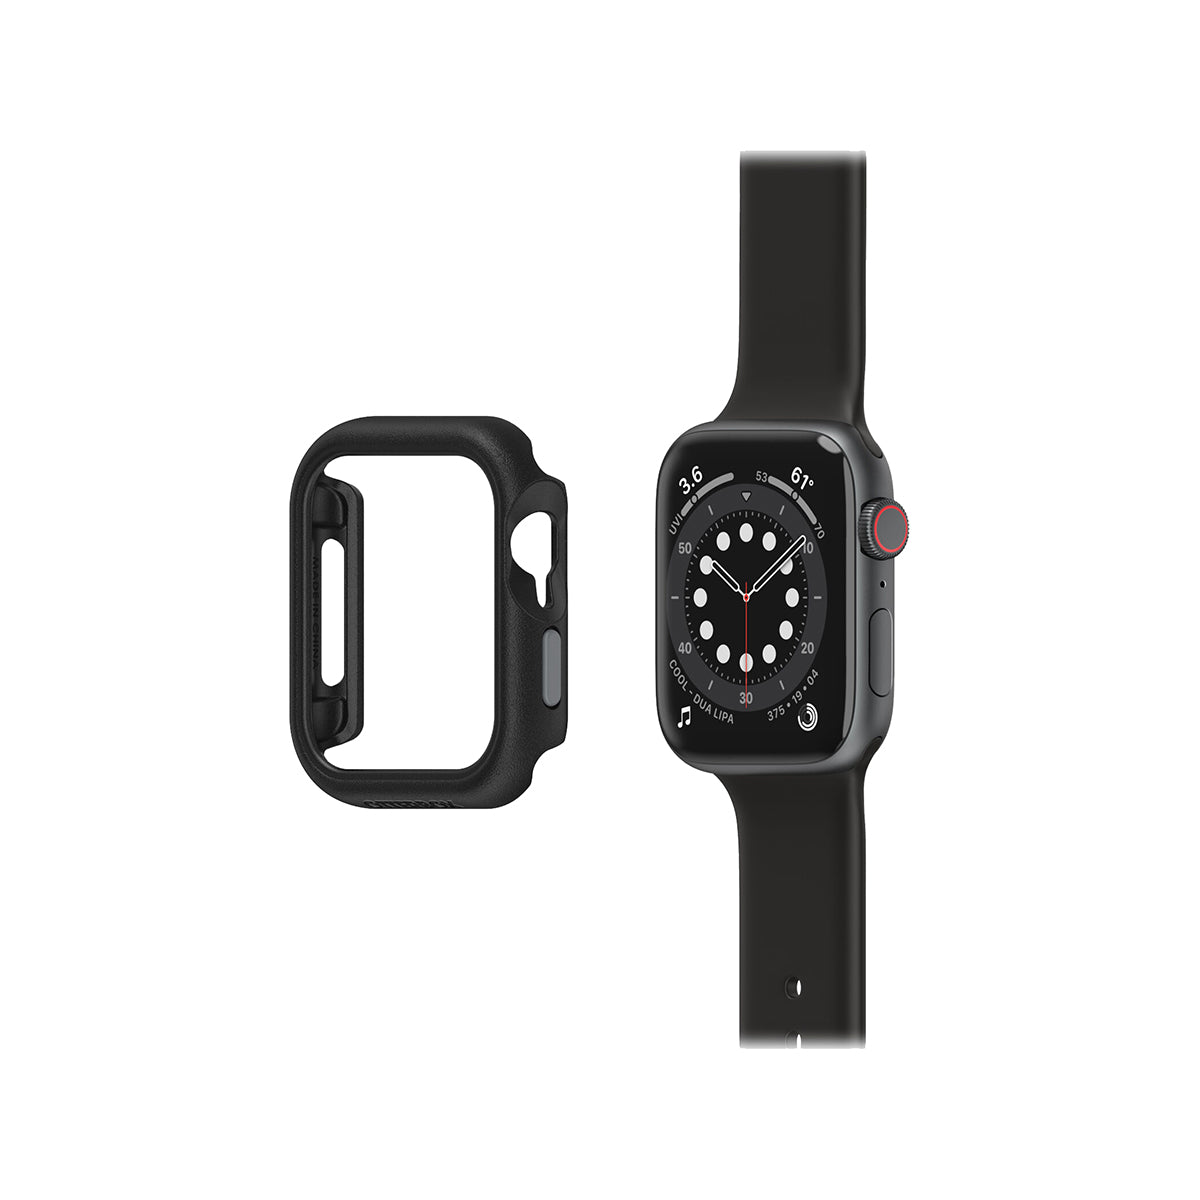 Otterbox bumper case for Apple watch